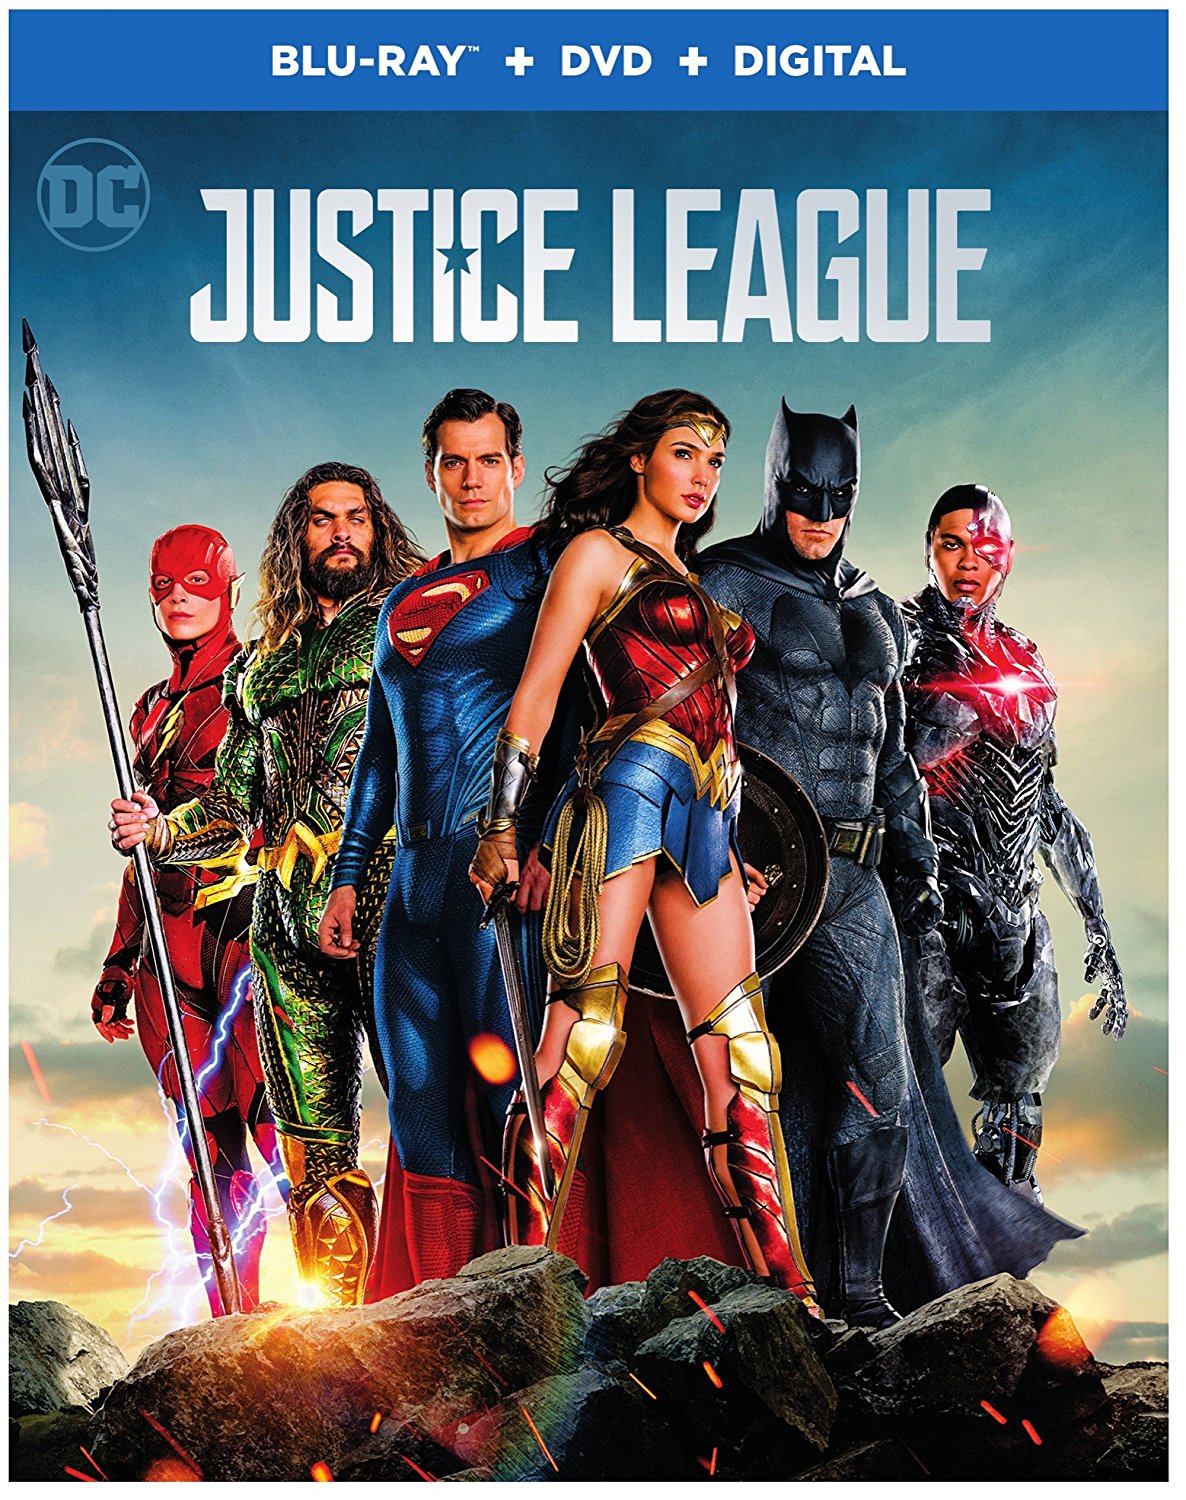  Justice League now available on Blu-ray